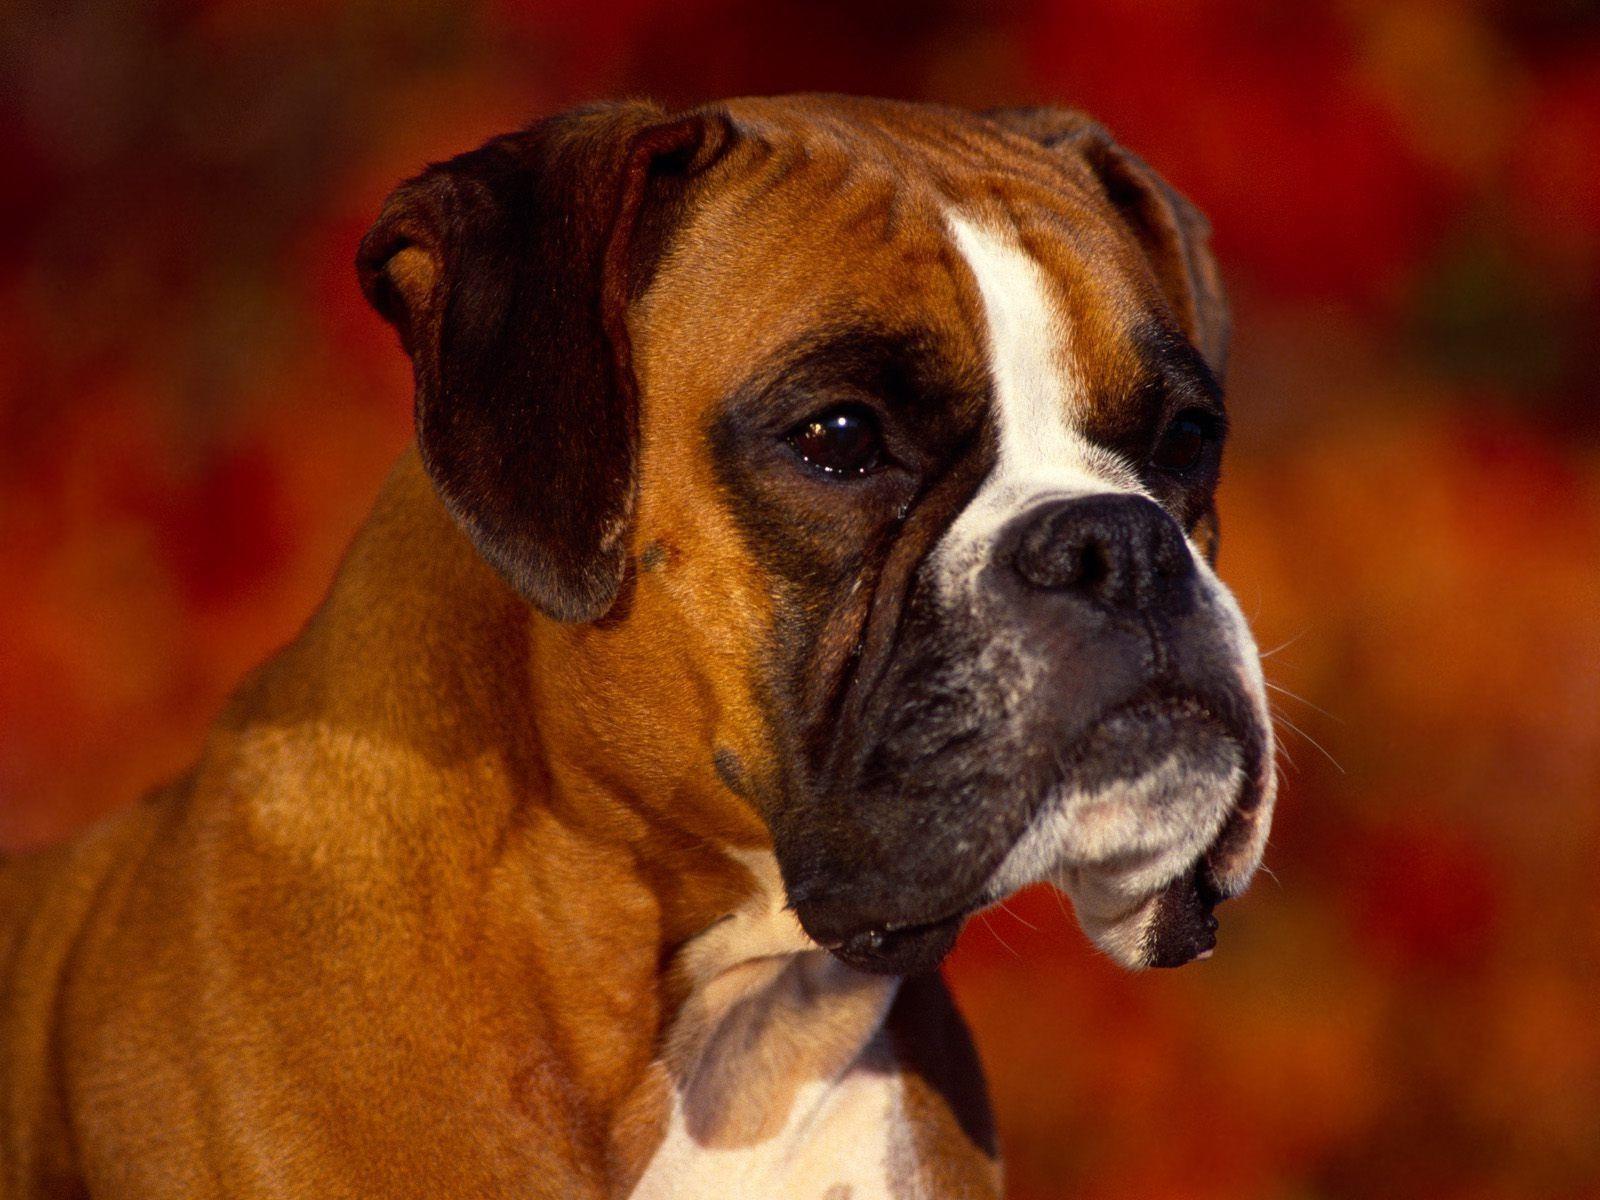 Boxer Dog Head Portrait Free Stock Photo and Wallpapers